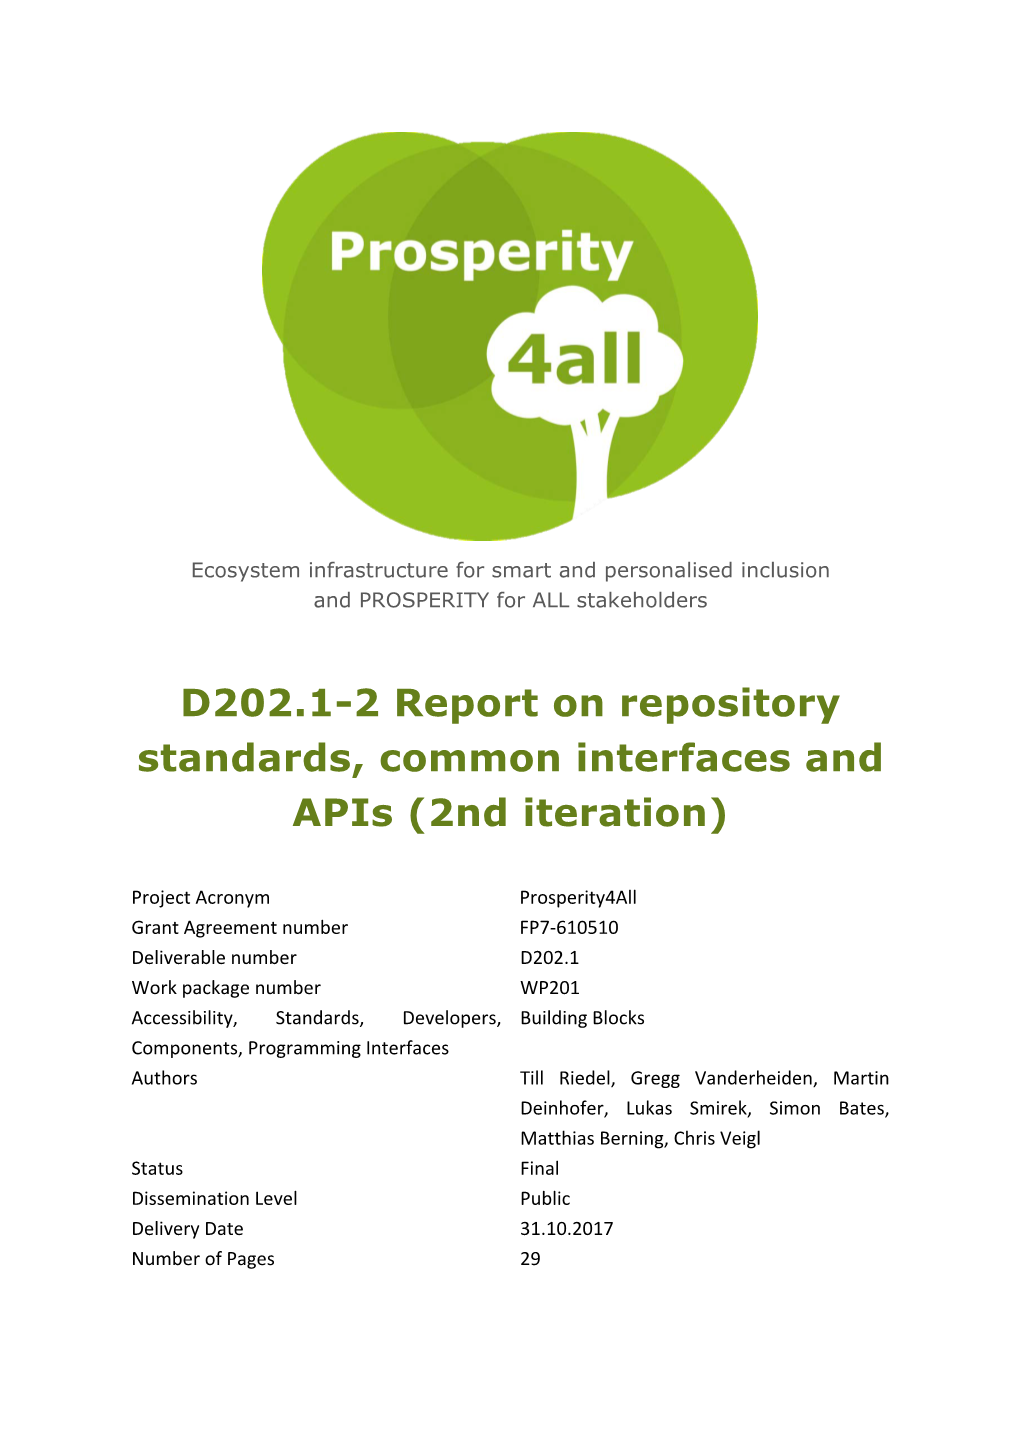 Report on Repository Standards, Common Interfaces and Apis (2Nd Iteration)